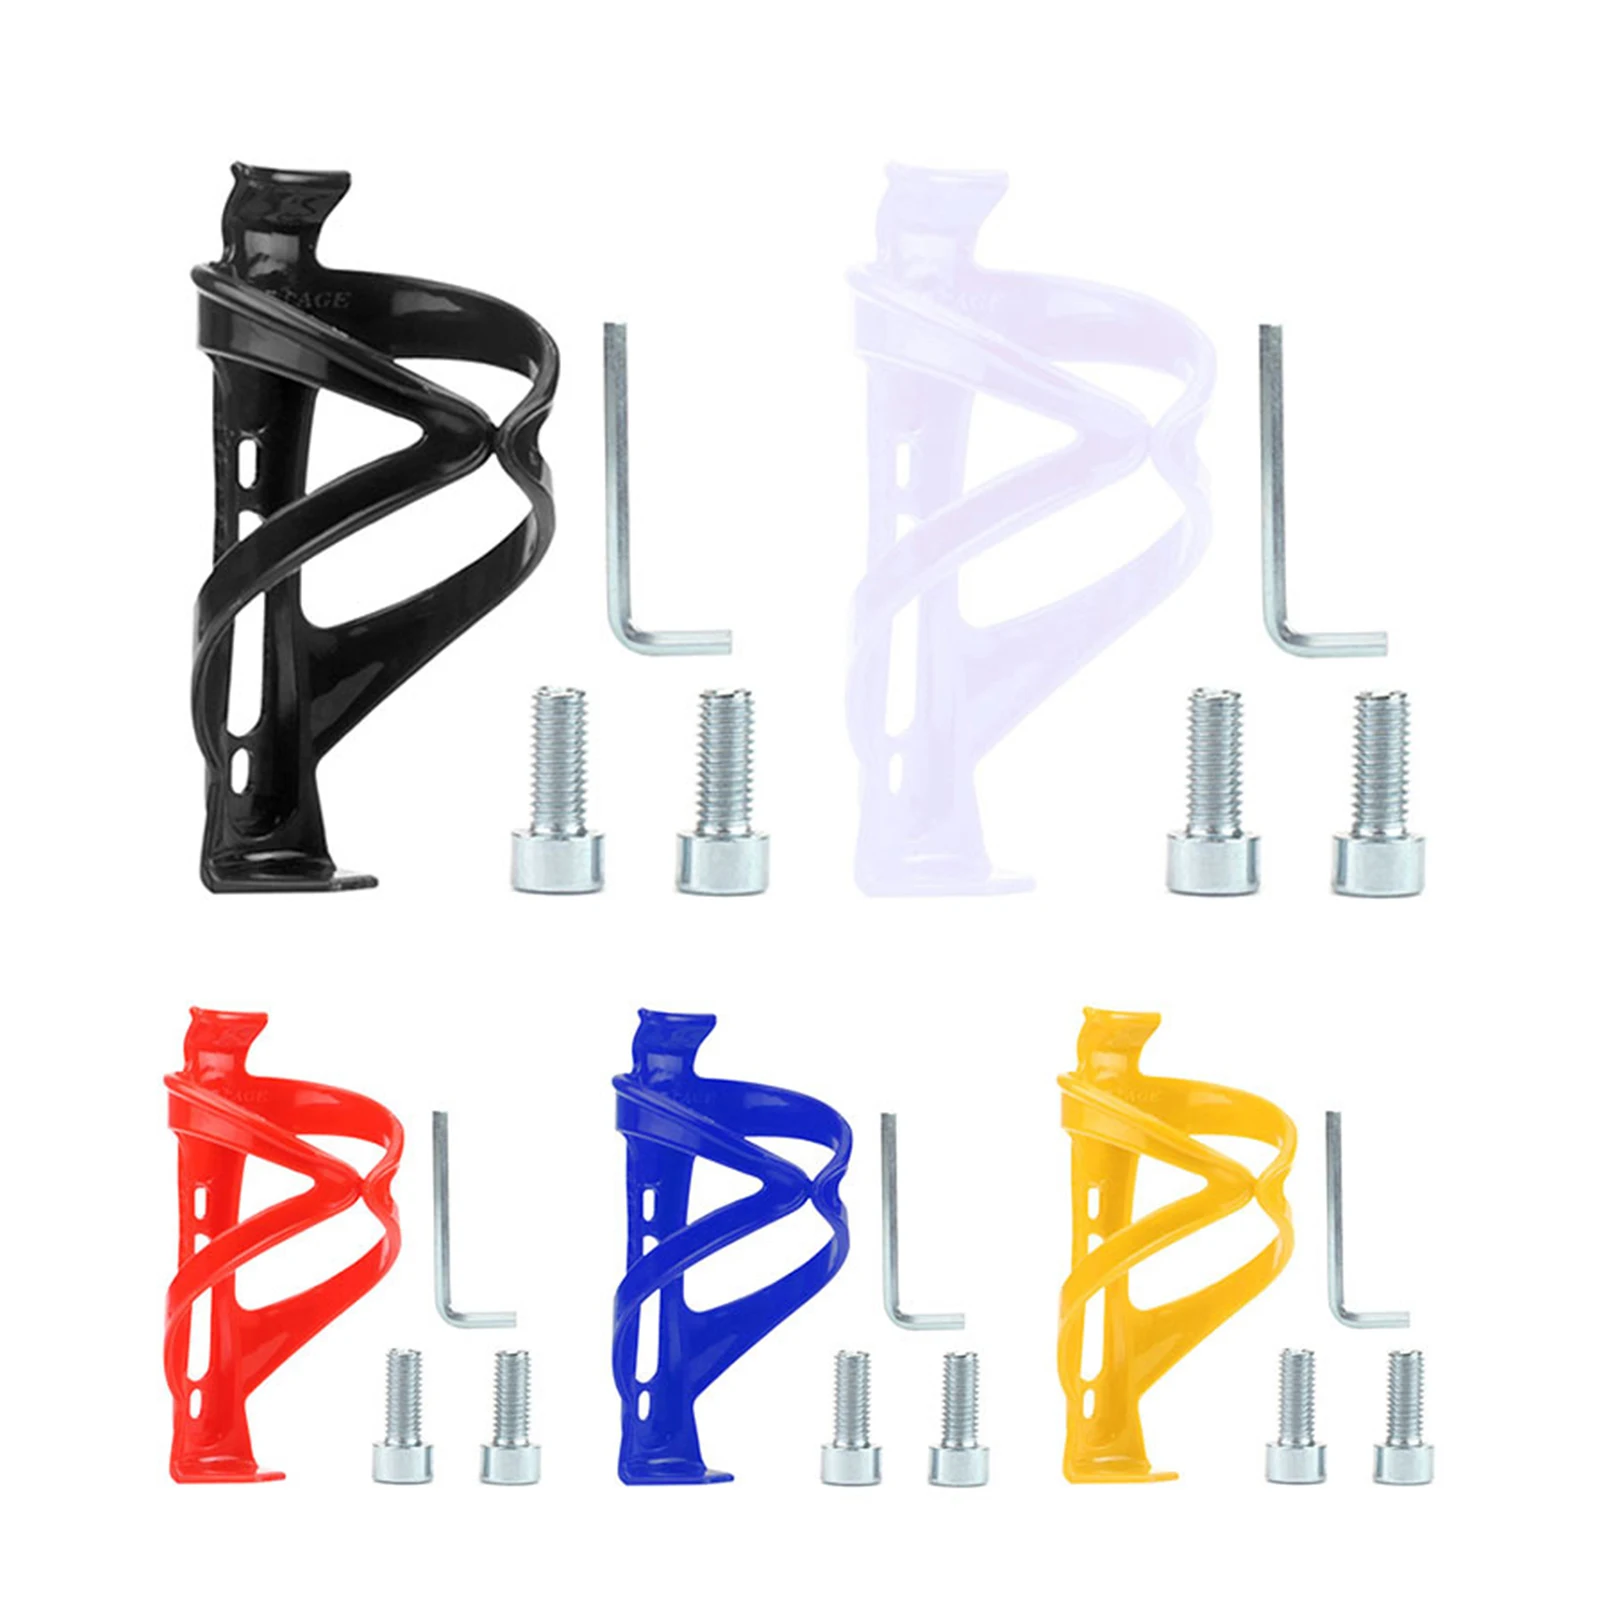 Plastic Bottle Cage Bicycle Bottle Holder Water Bottle Rack Mount MTB Road Folding Bike Cycling Accessories